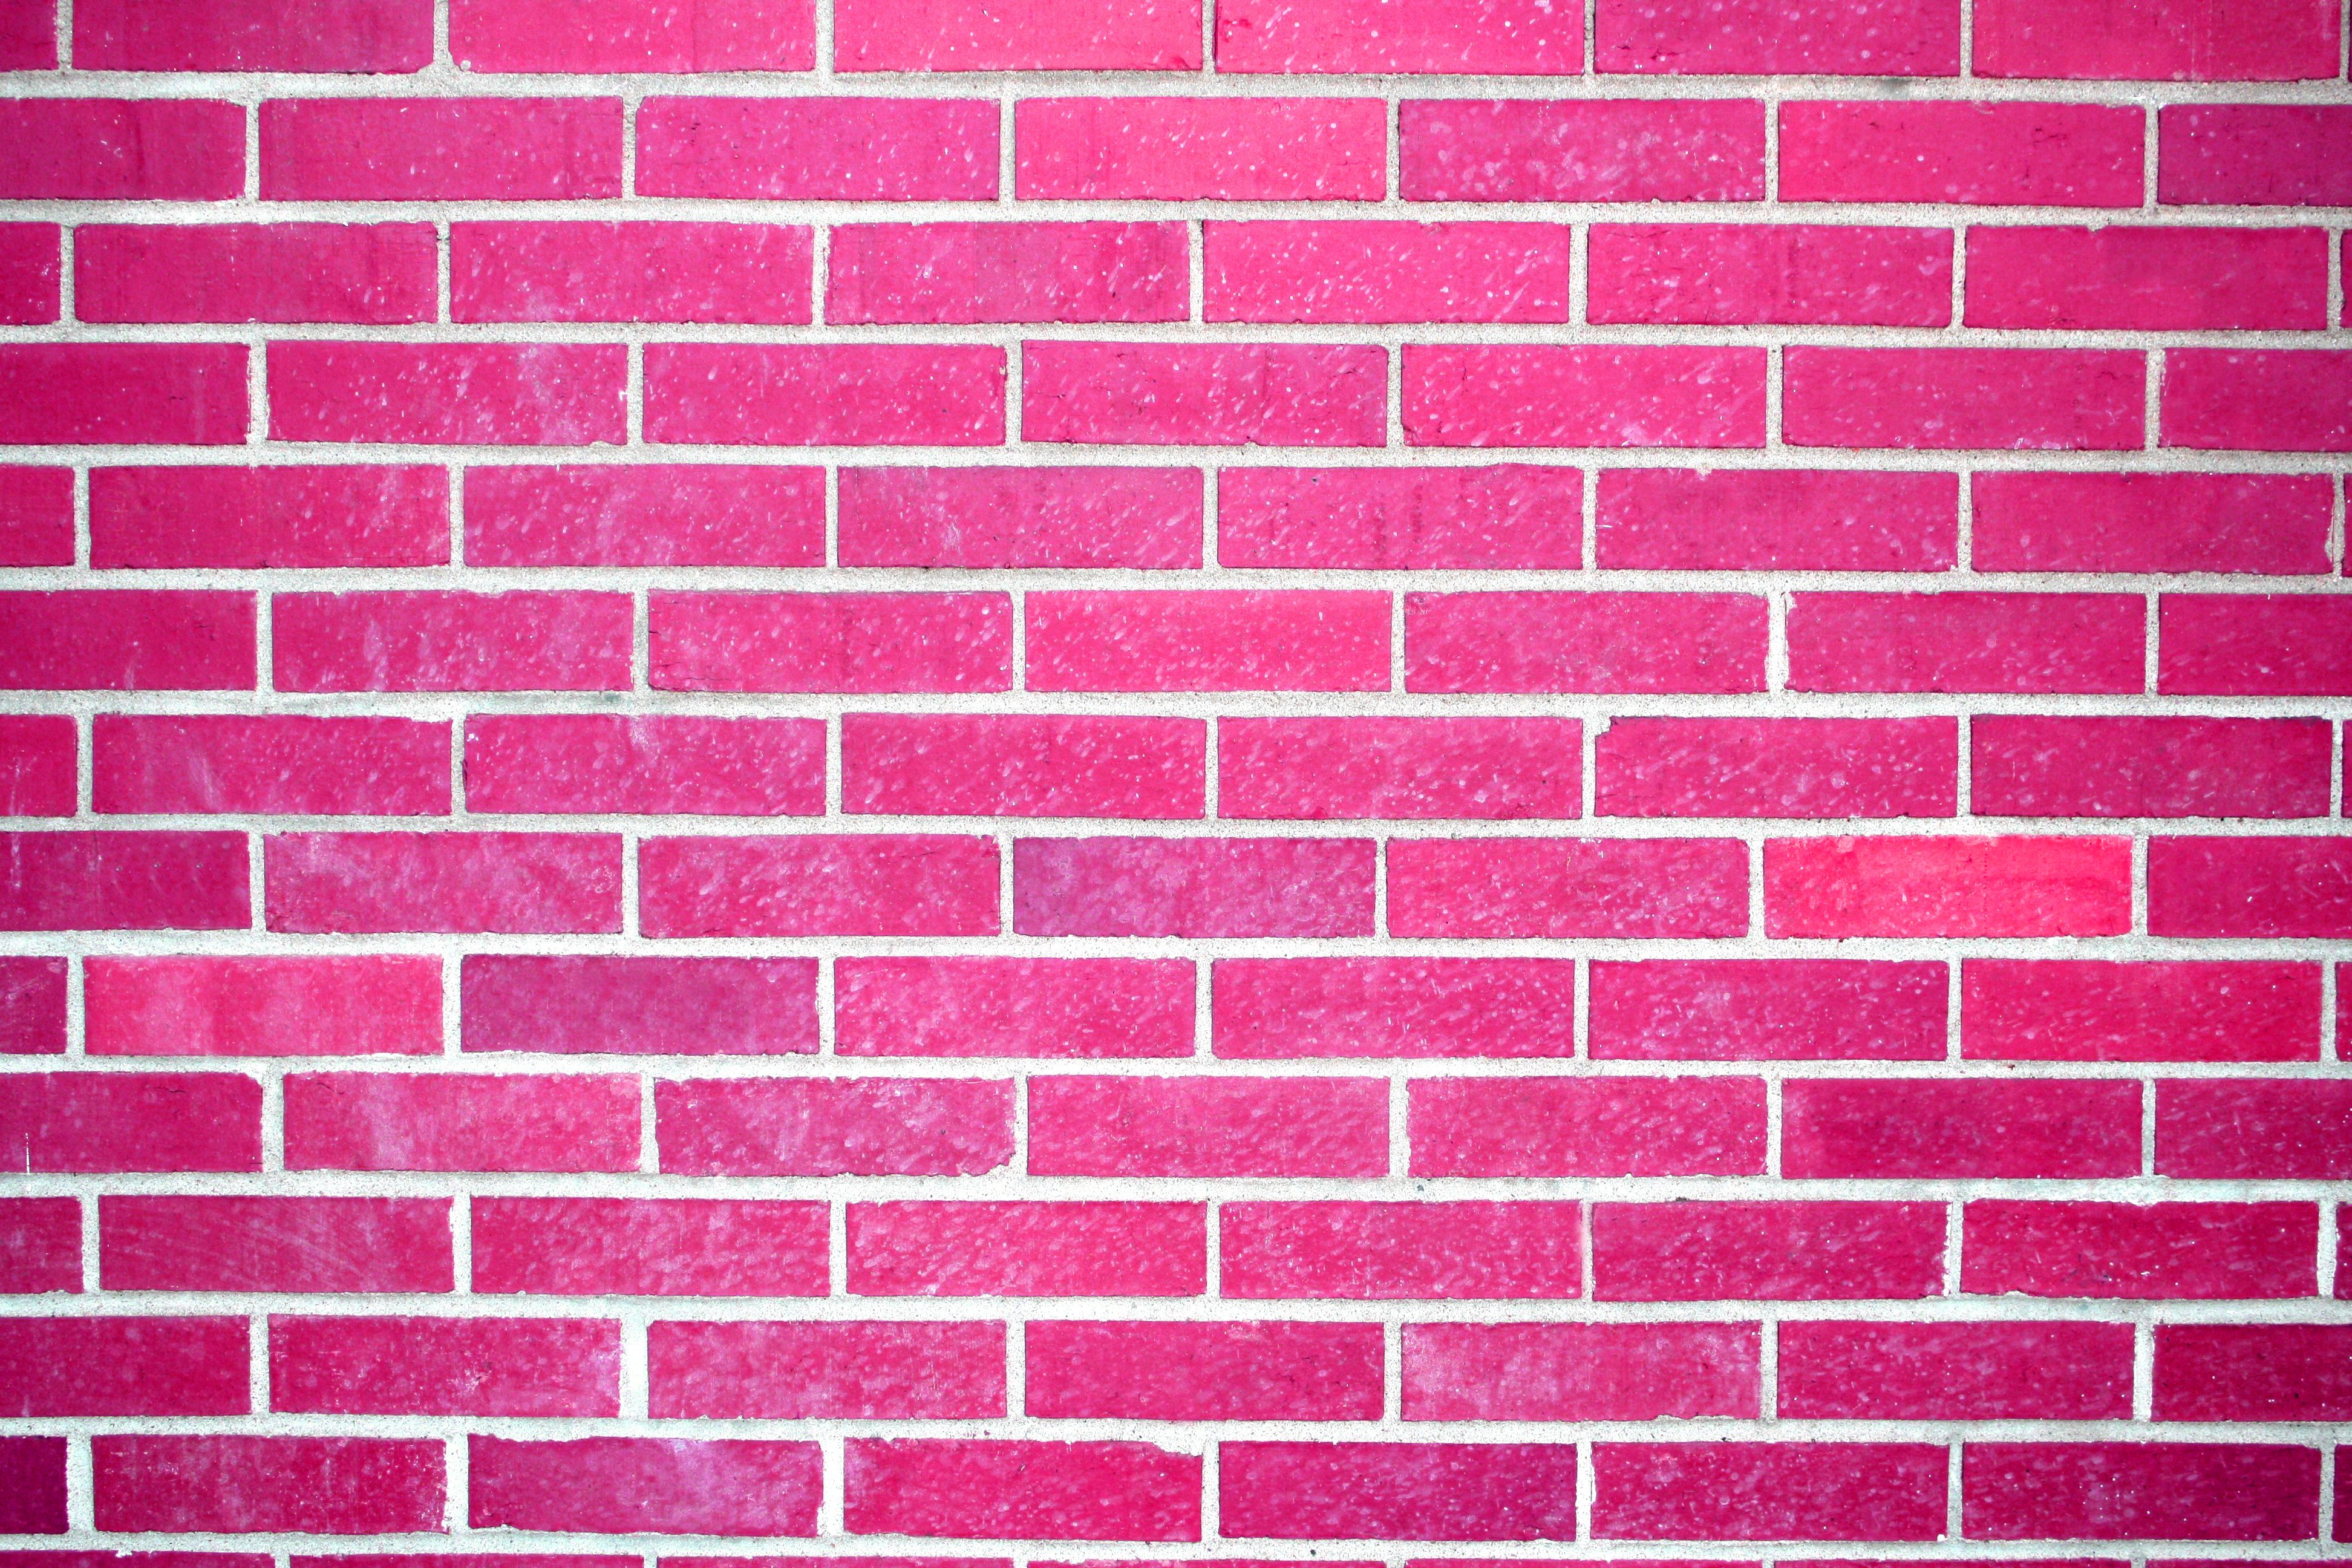 Hot Pink Brick Wall Texture Picture Photograph Photos Public